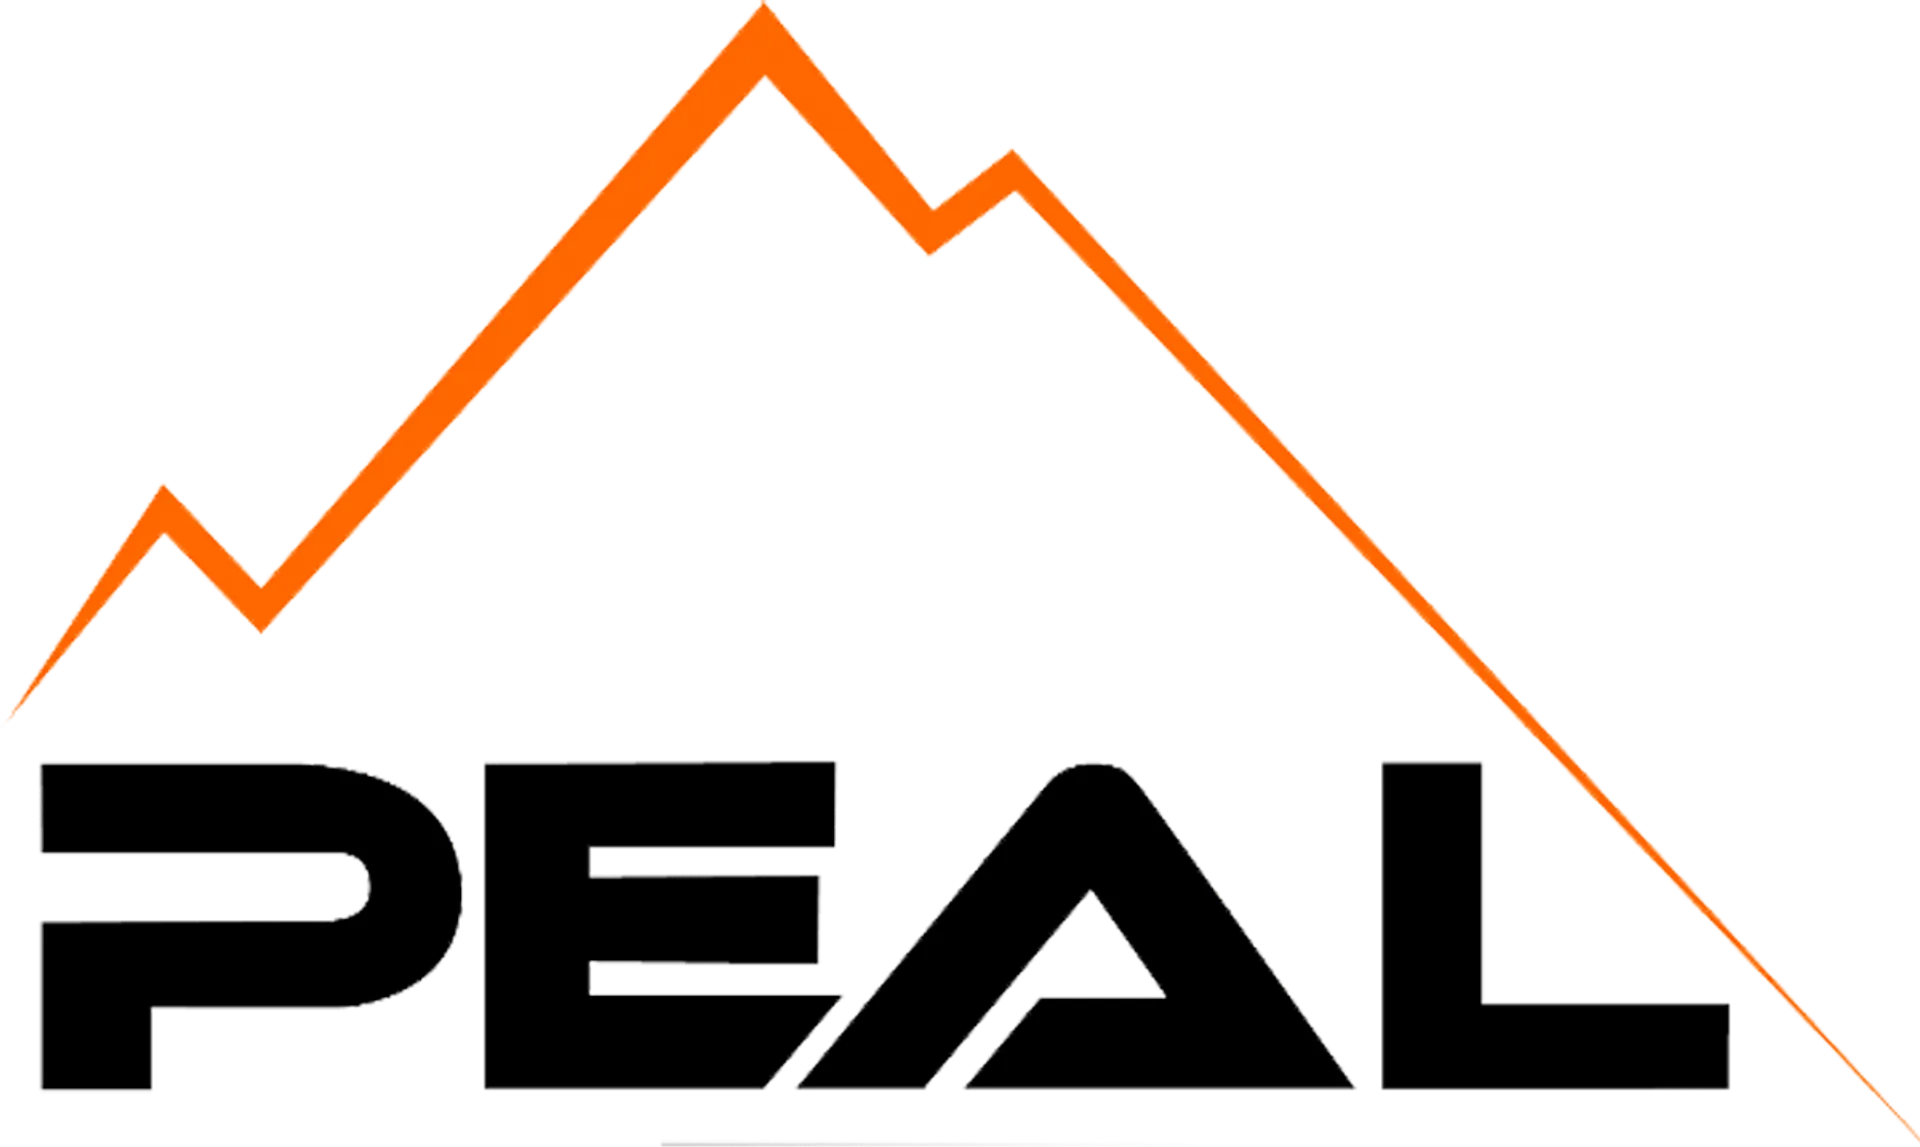 PEAL logo of current catalogue